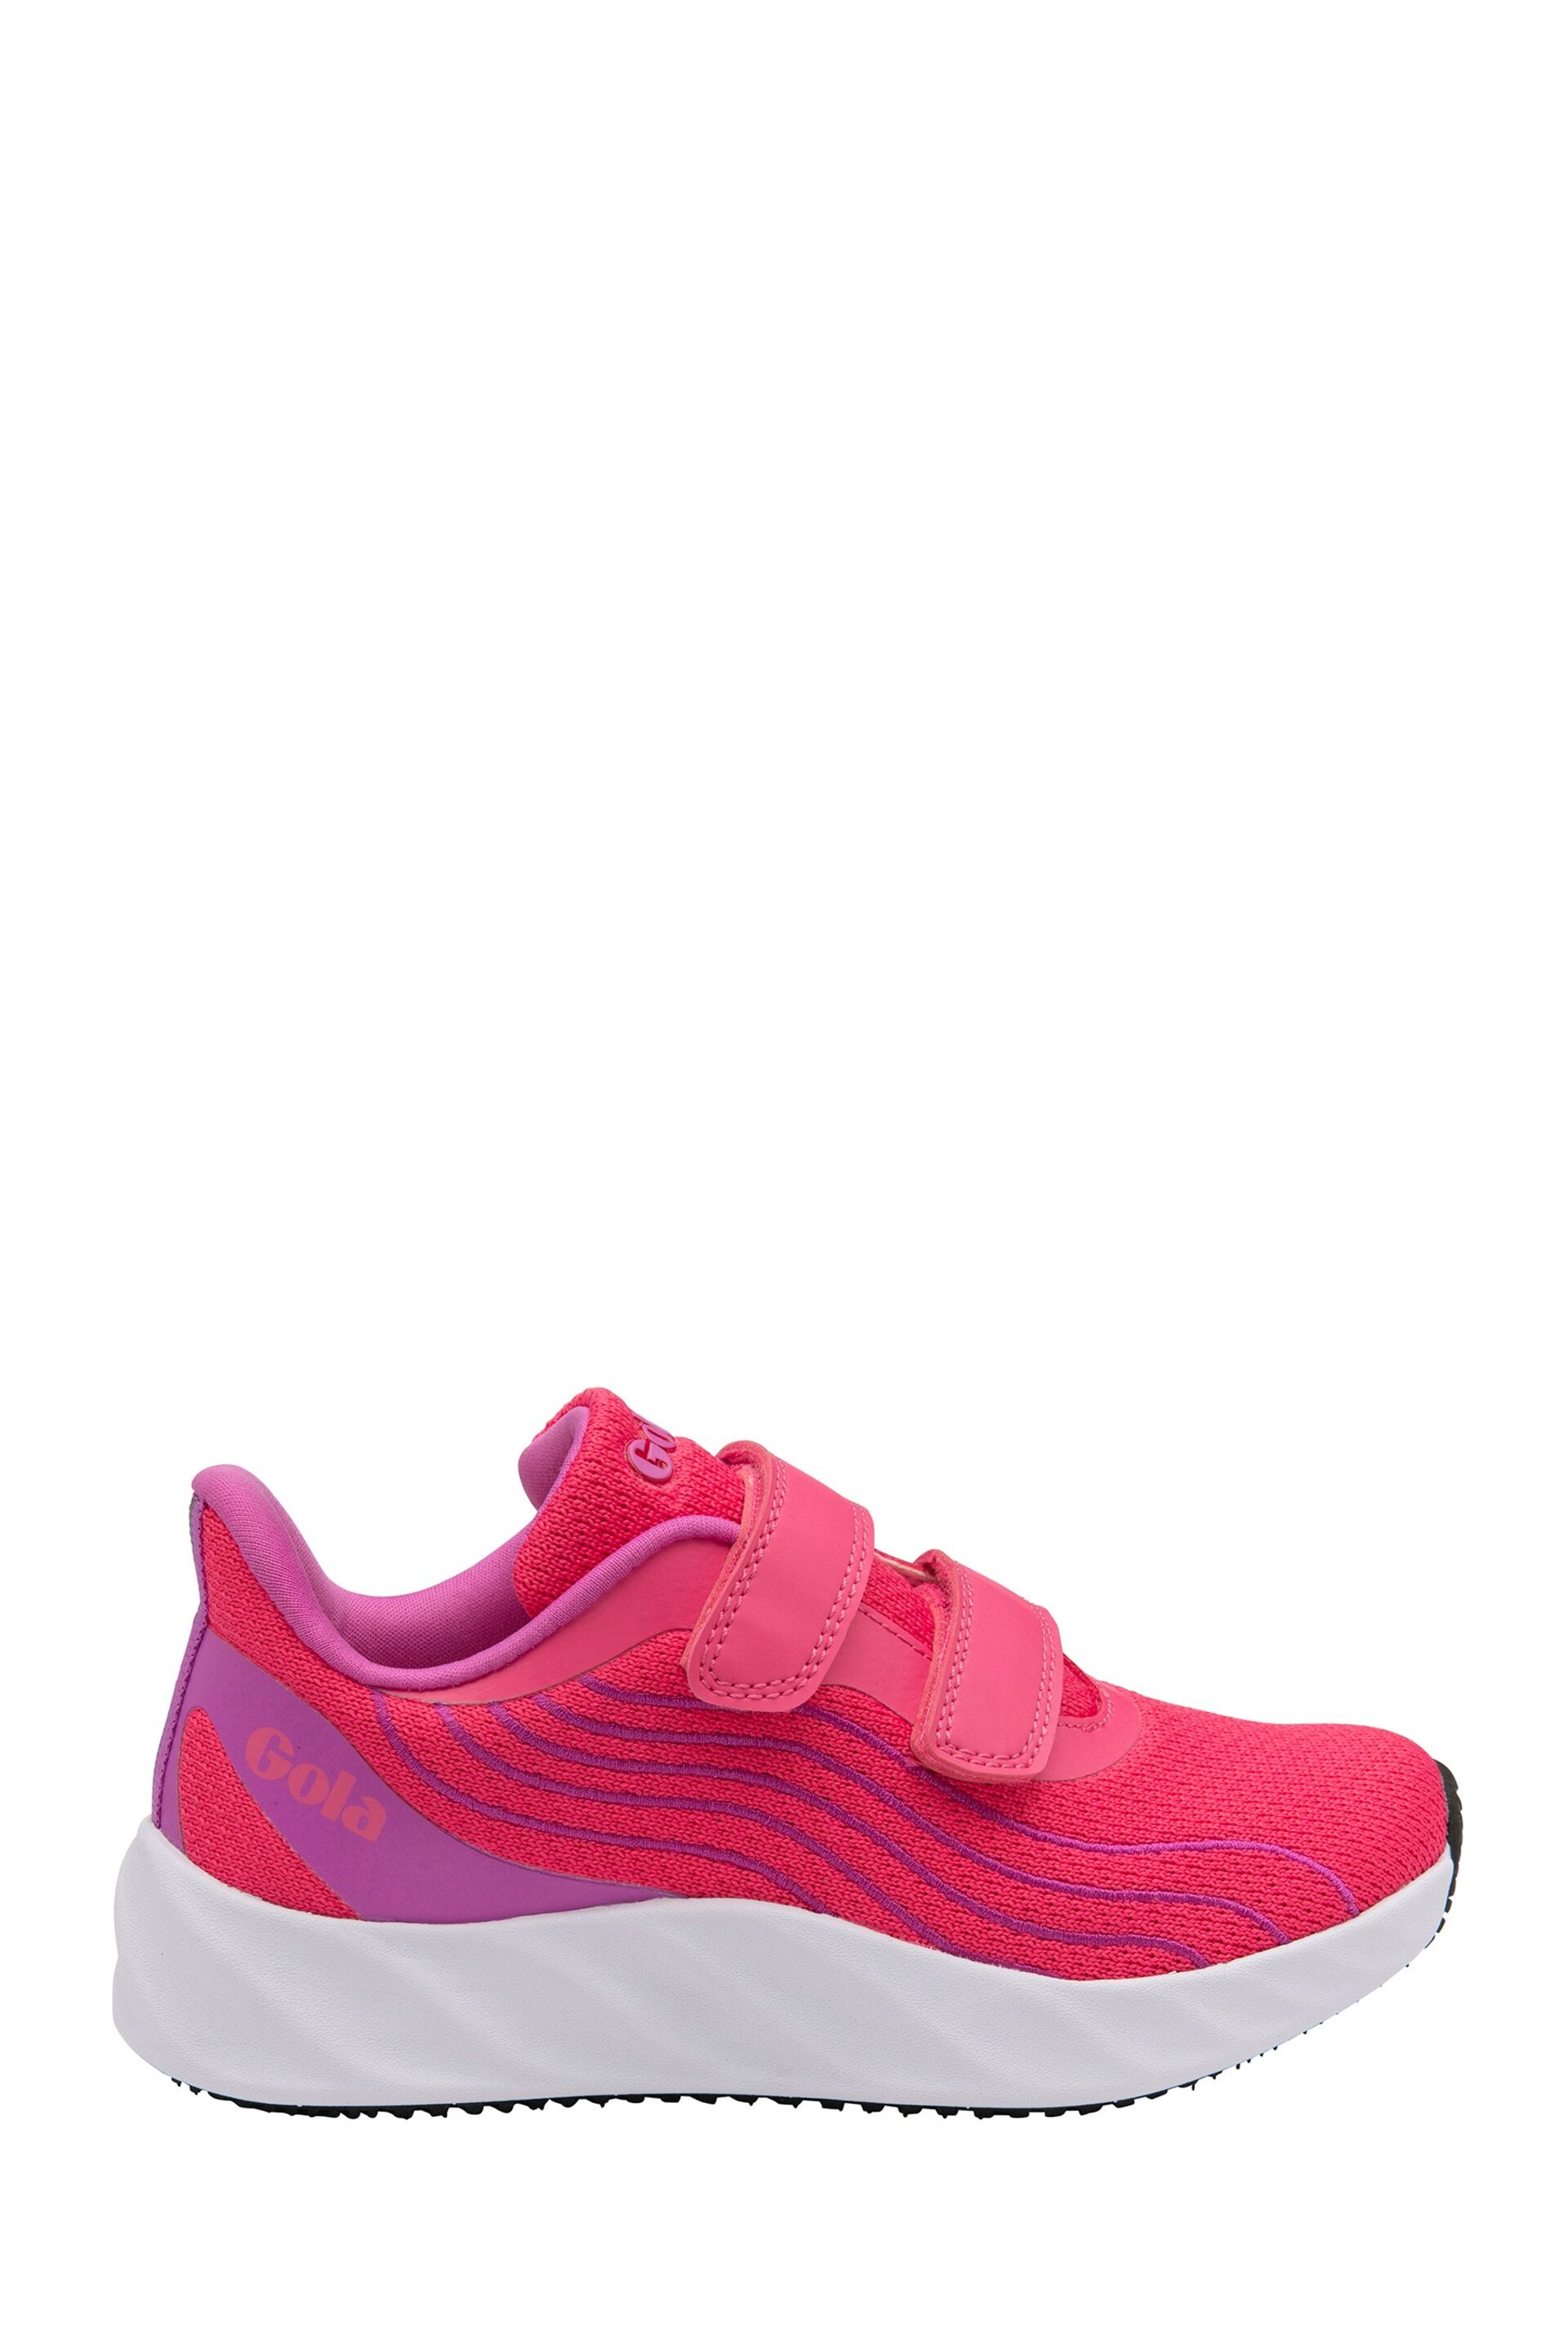 Gola Pink Alzir Twin Bar Quick Fasten Kids Training Trainers - Image 1 of 4